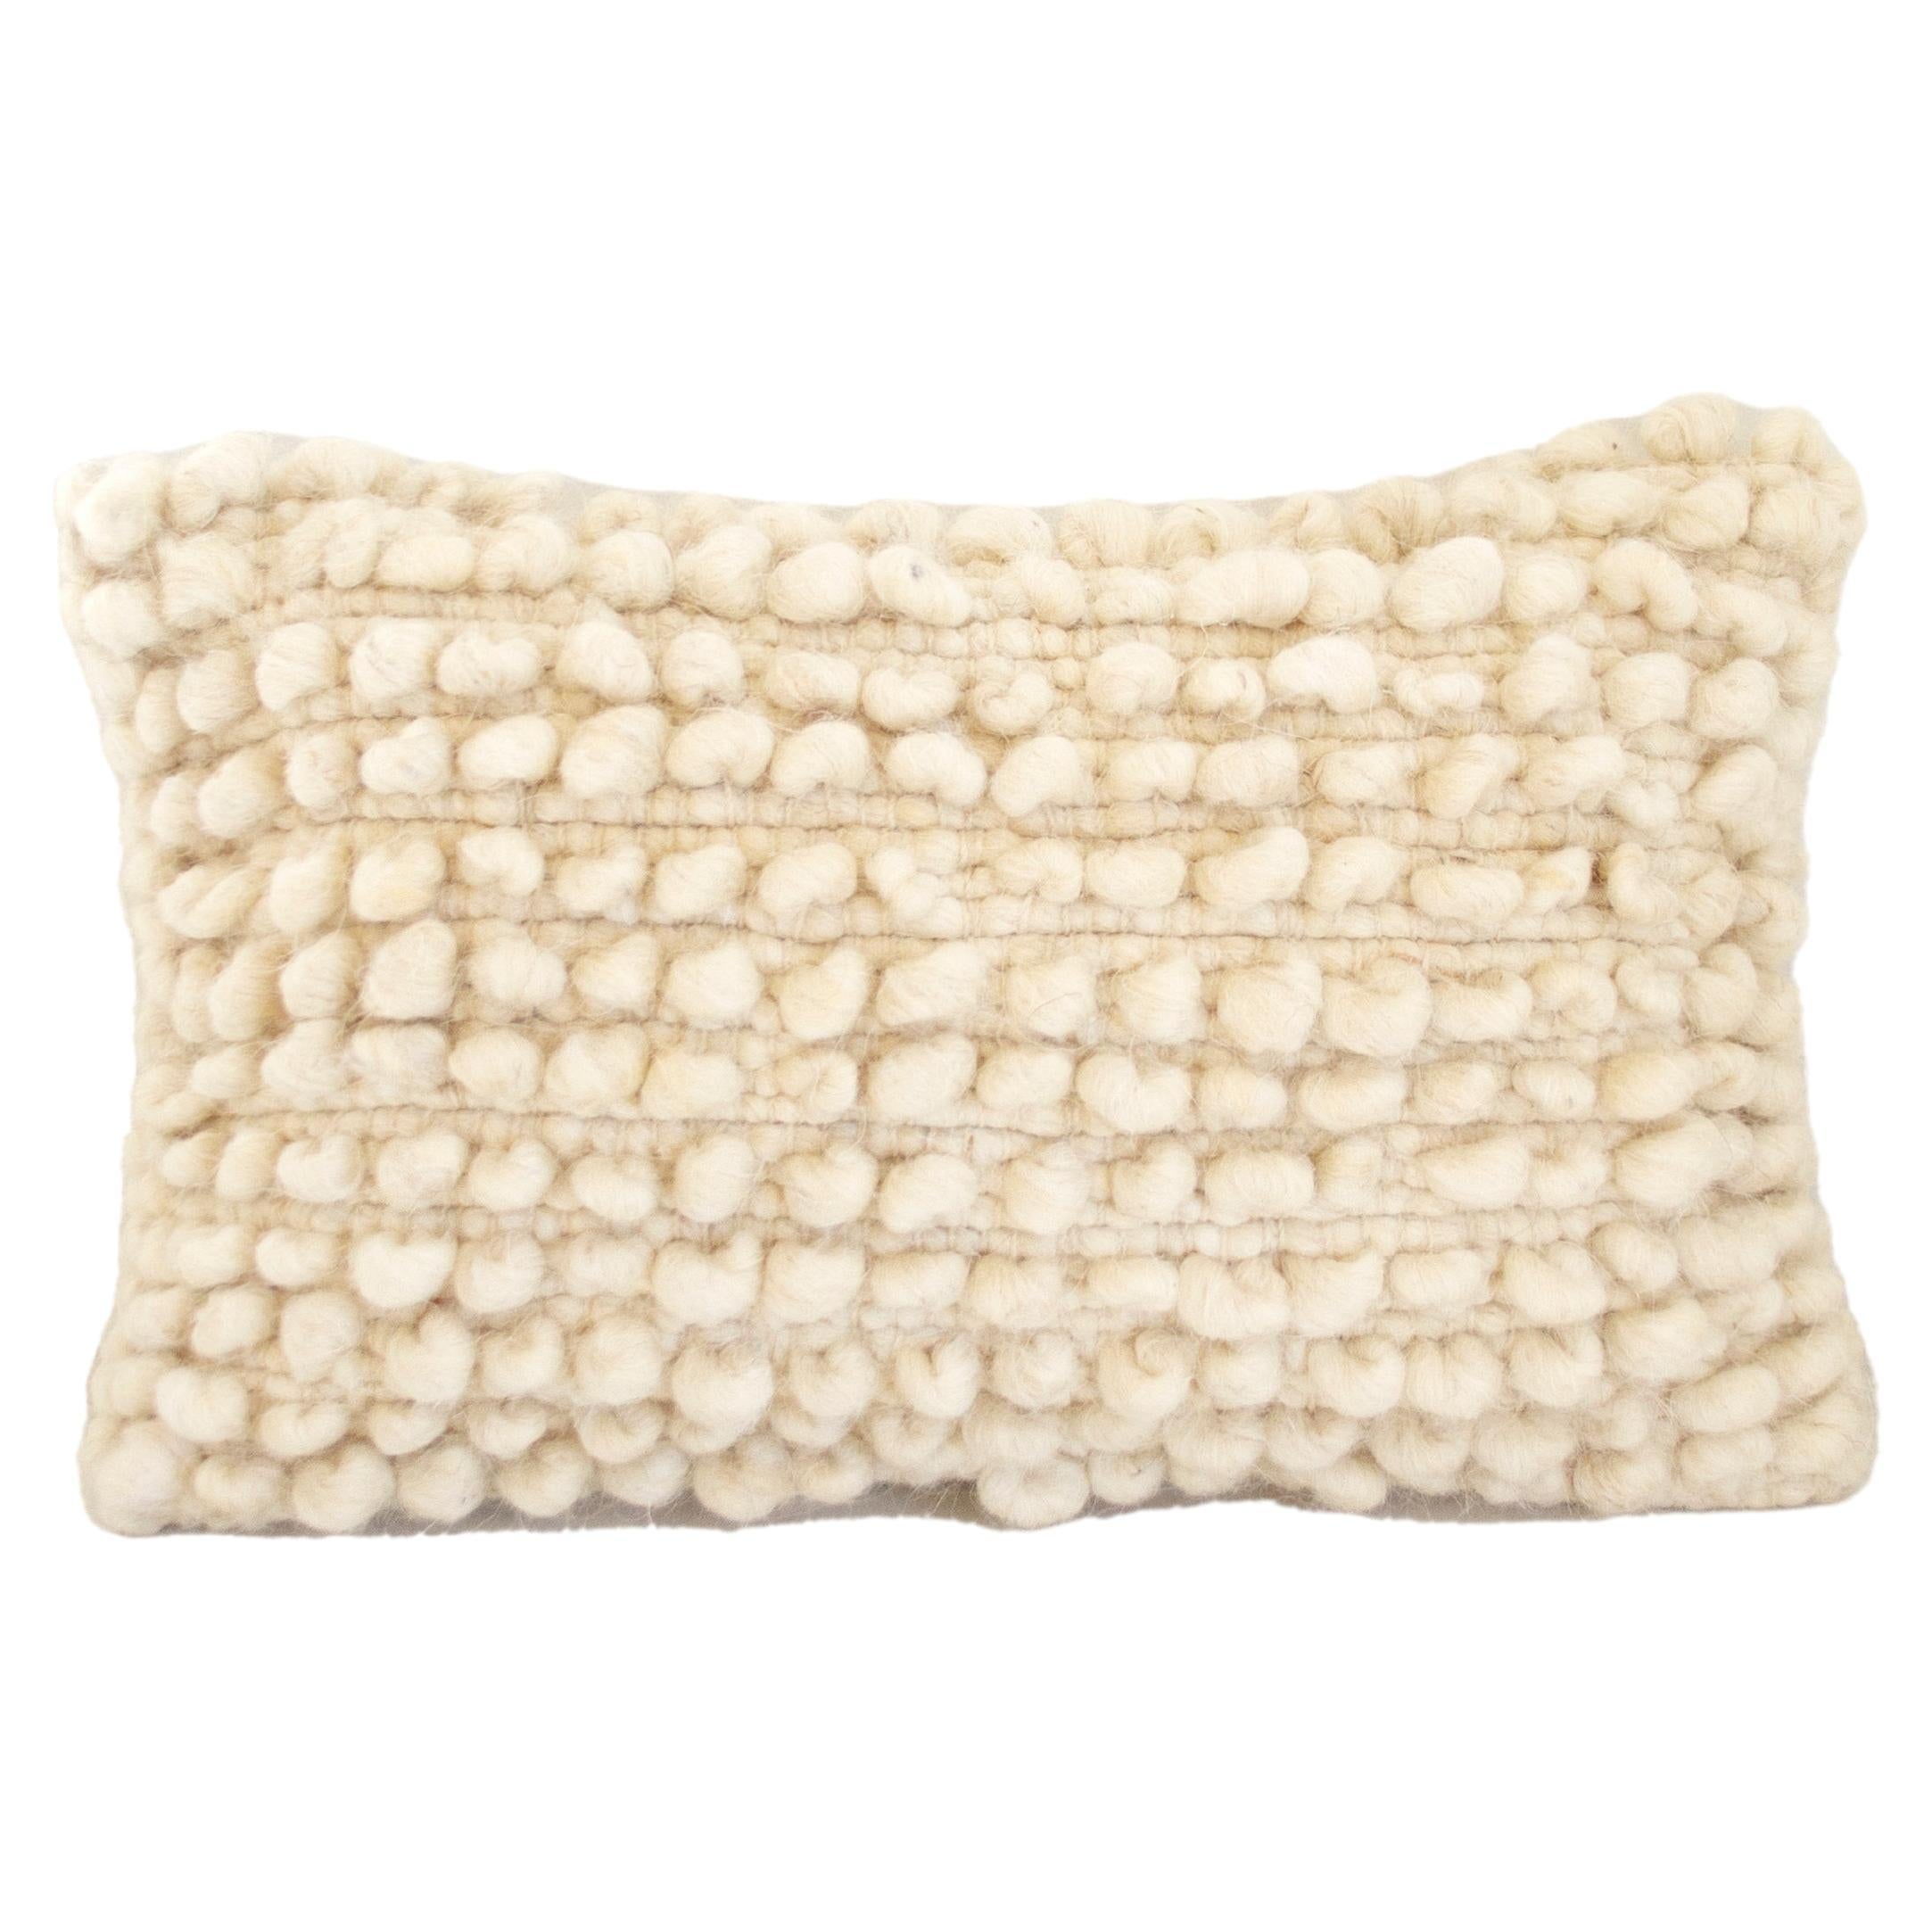 Fatima Bobble Throw Pillow in Cream White made from 100% sheep wool - 20" x 12"